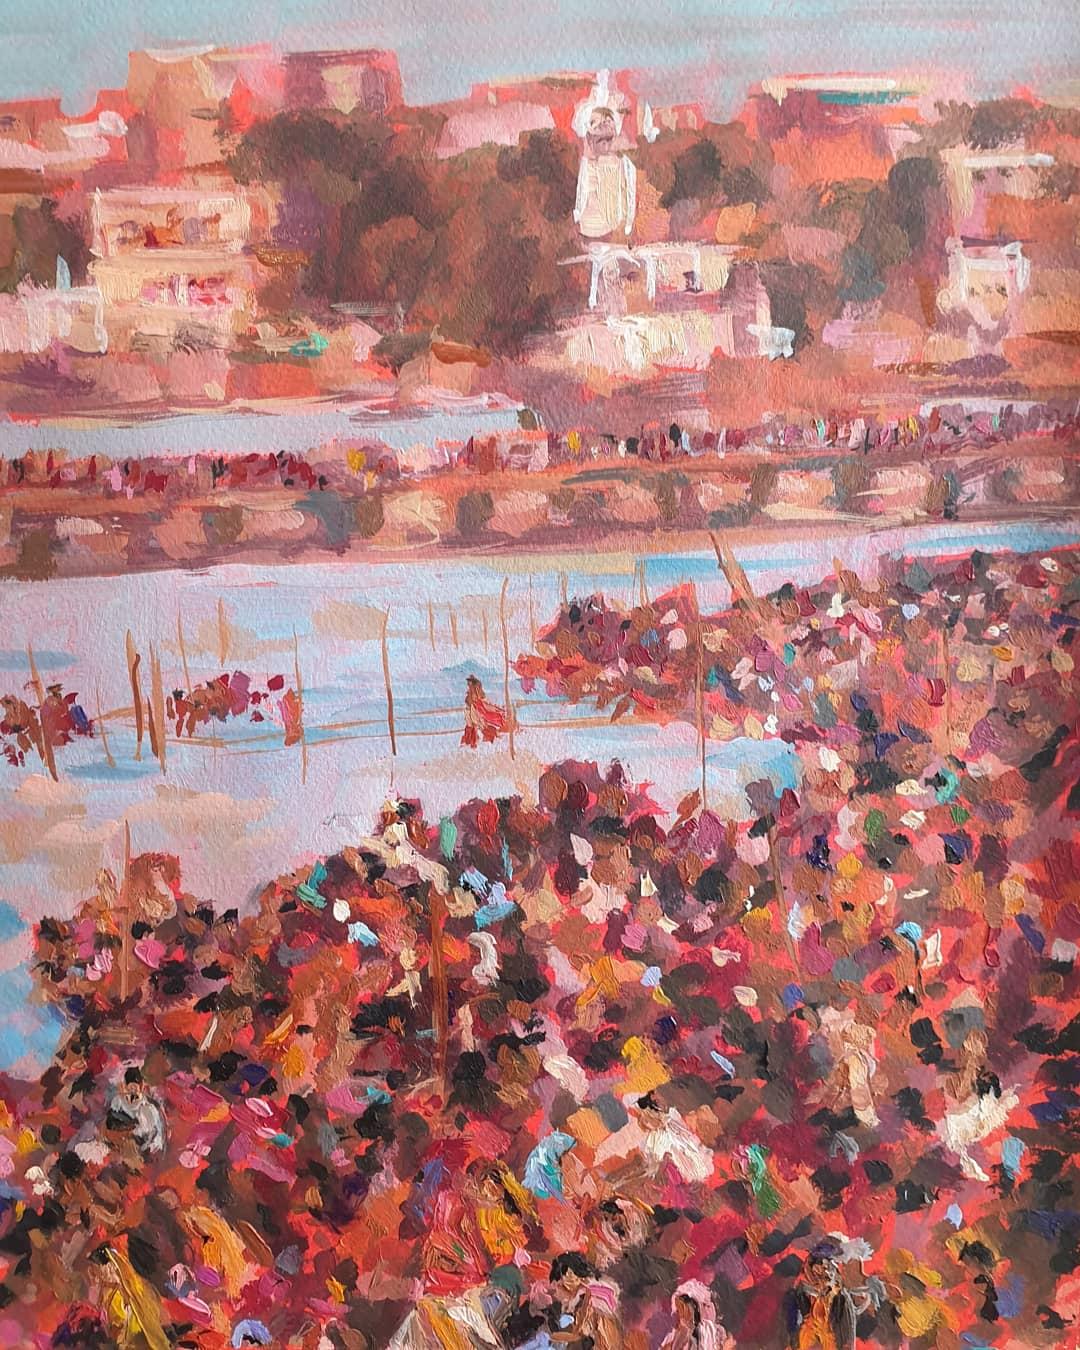 Crowd at the Ganges by Charmaine Chaudry, Contemporary art, Original art - Pink Figurative Painting by Charmaine Chaudry 